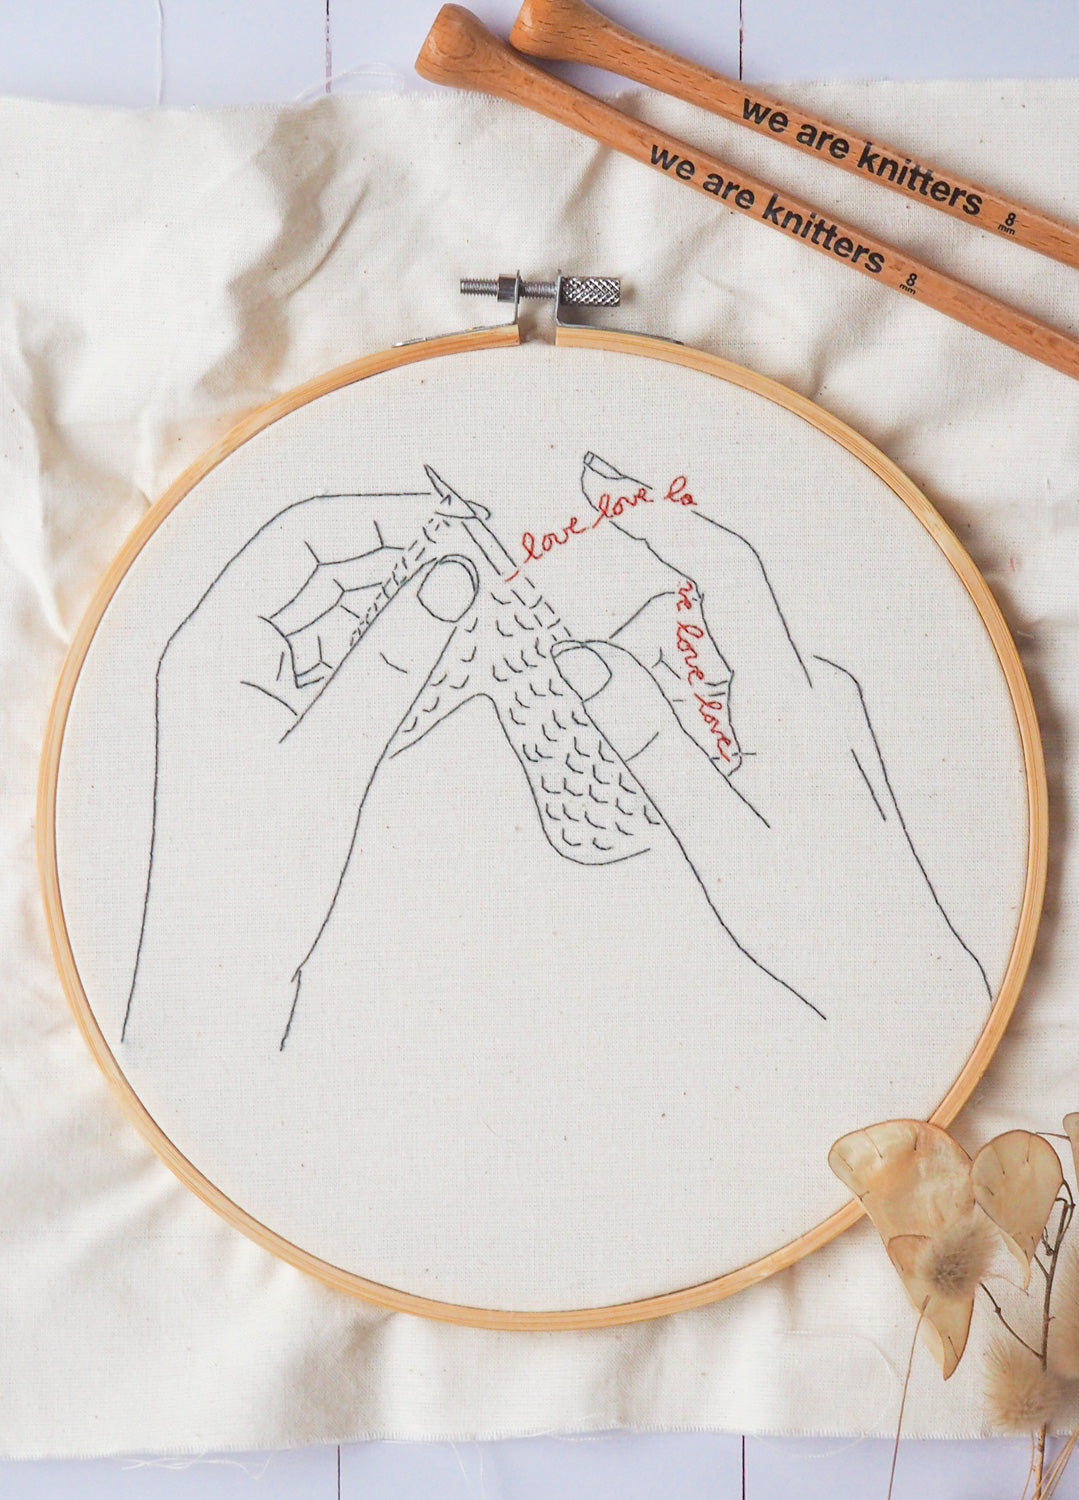 All We Need is Love Embroidery Free Pattern x @caro_tricote